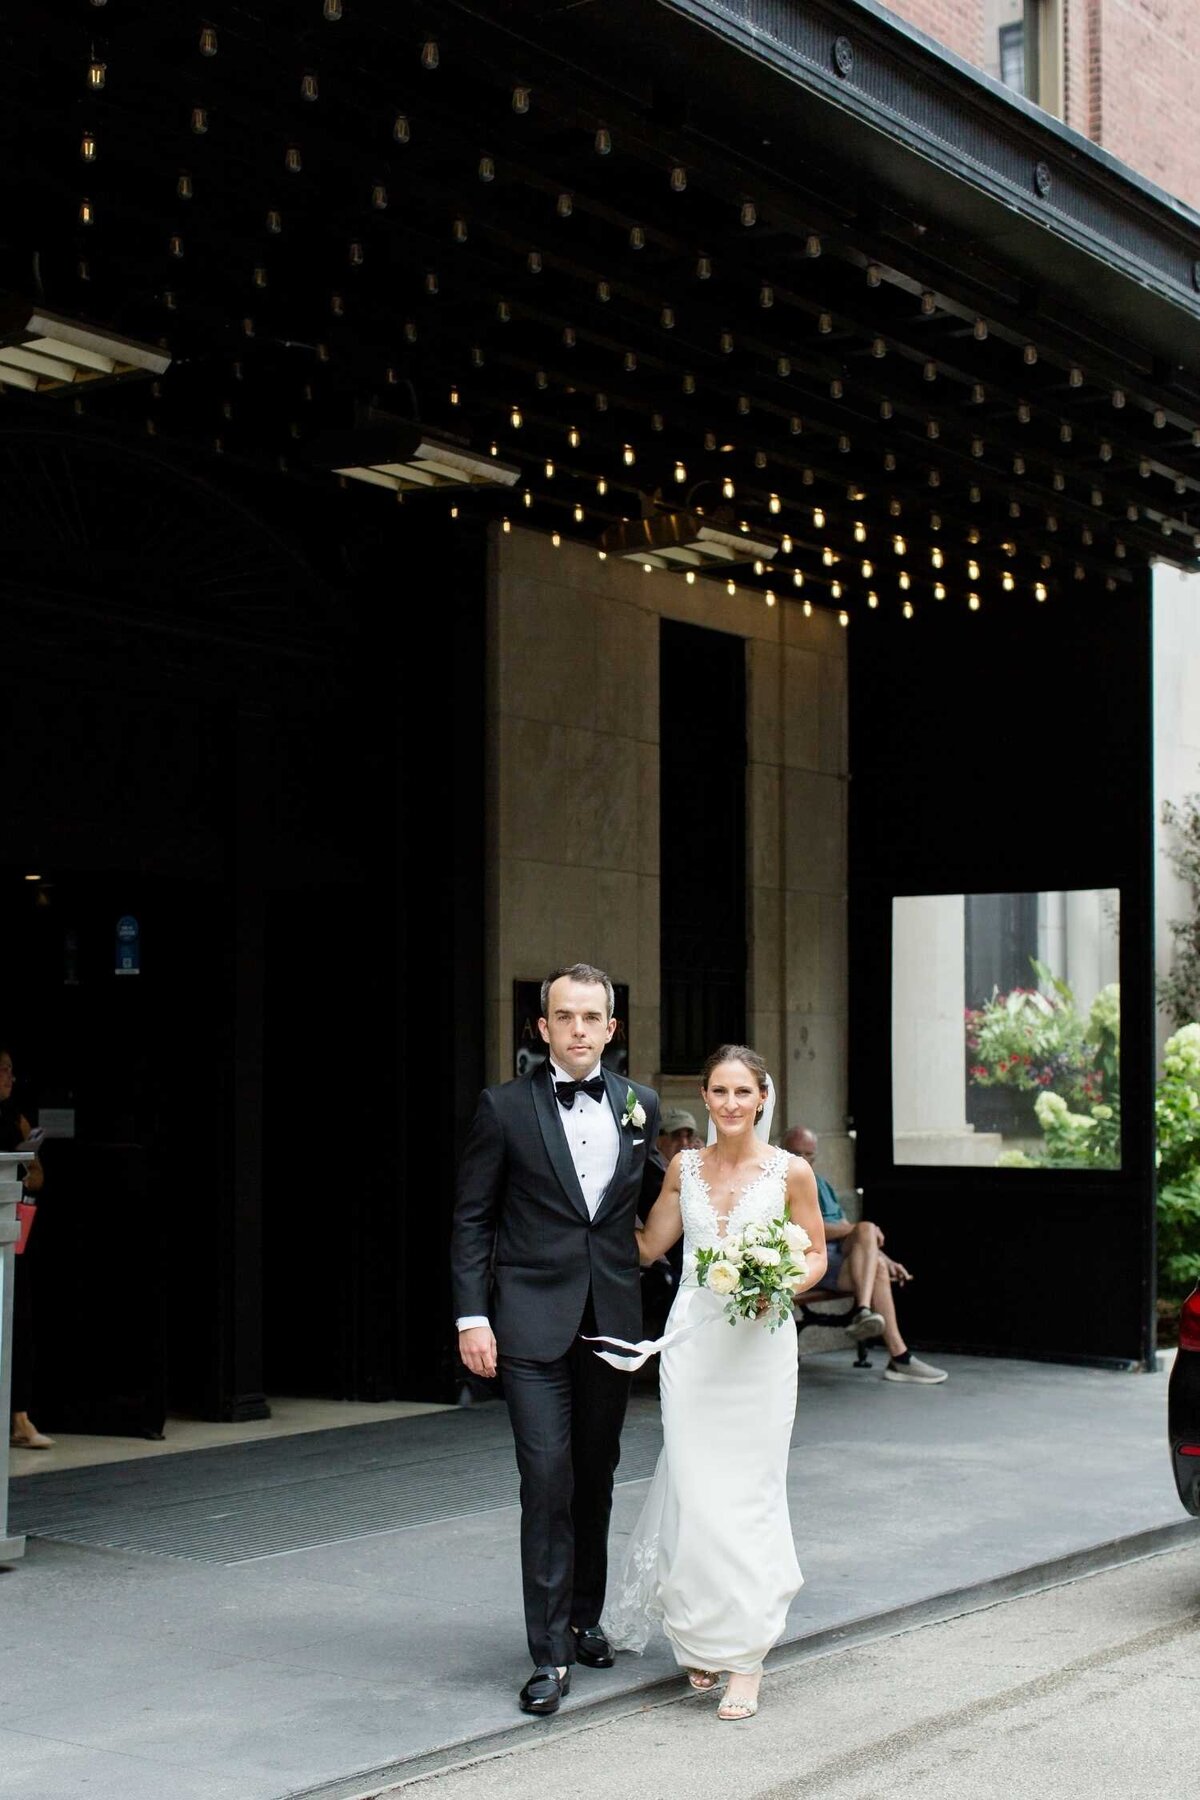 Bride and Groom city street portraits at the Ambassador Hotel before their Luxury Chicago Outdoor Historic Wedding Venue.